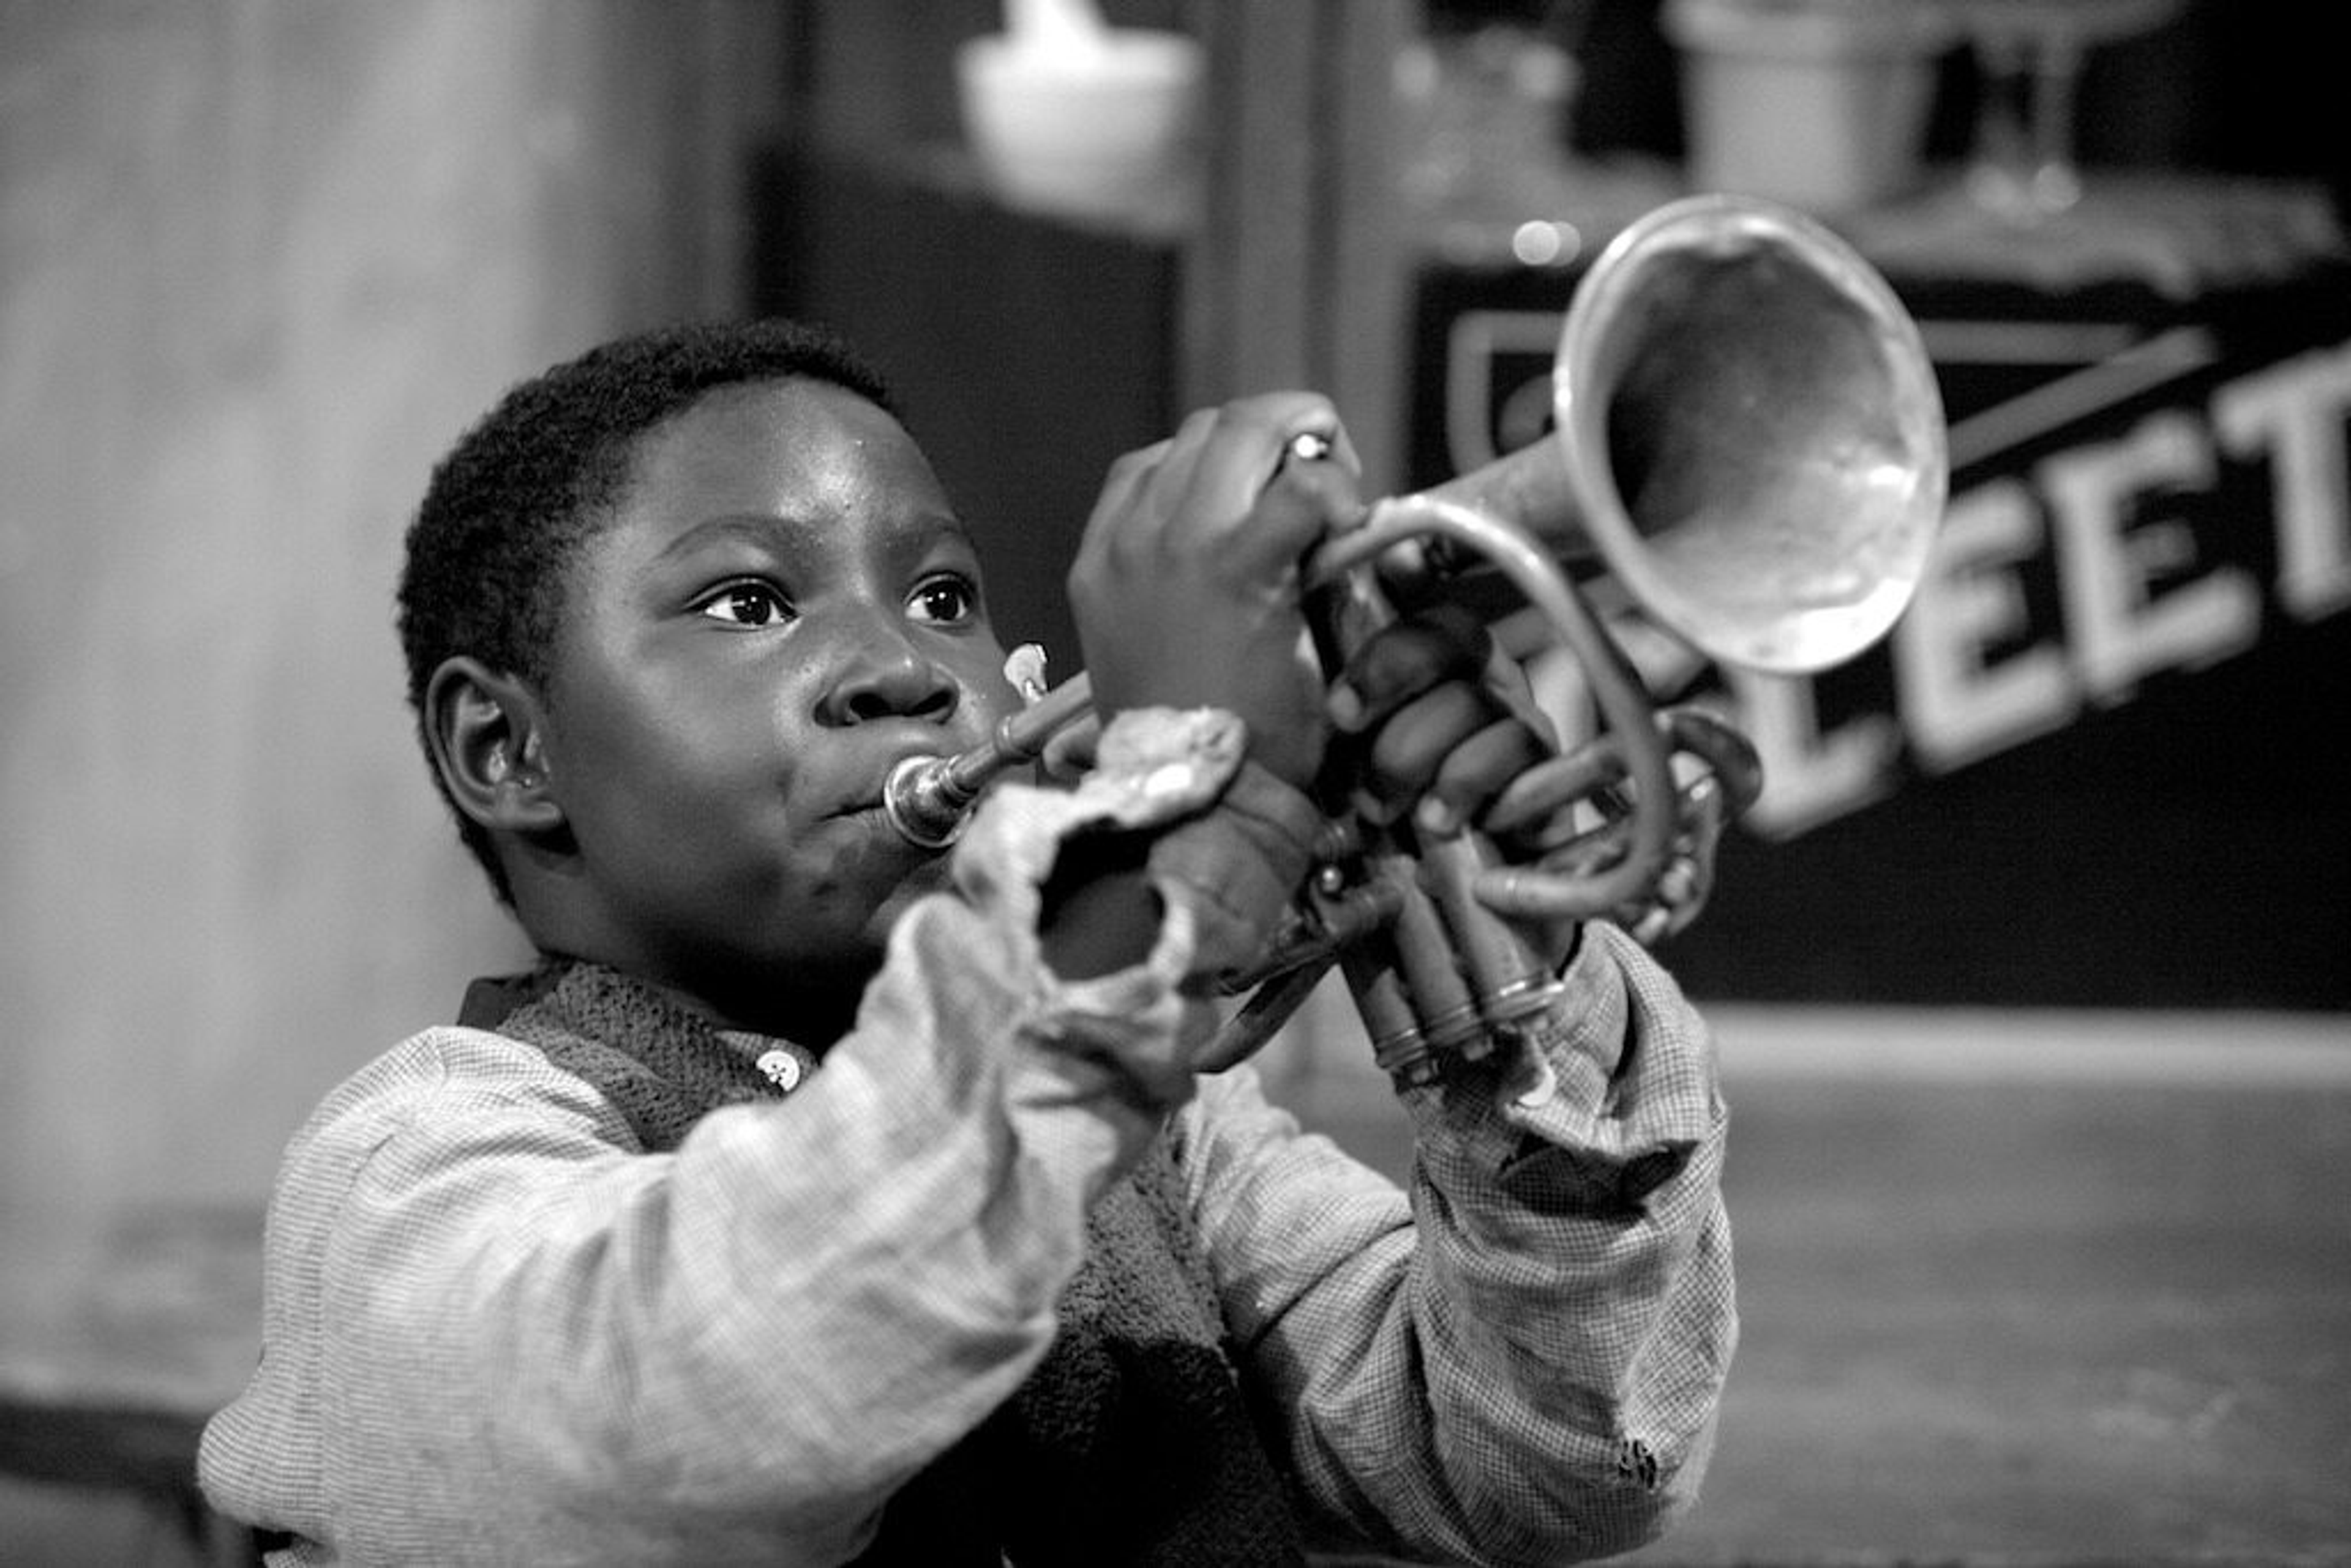 Louis Armstrong as a young boy playing the trumpet